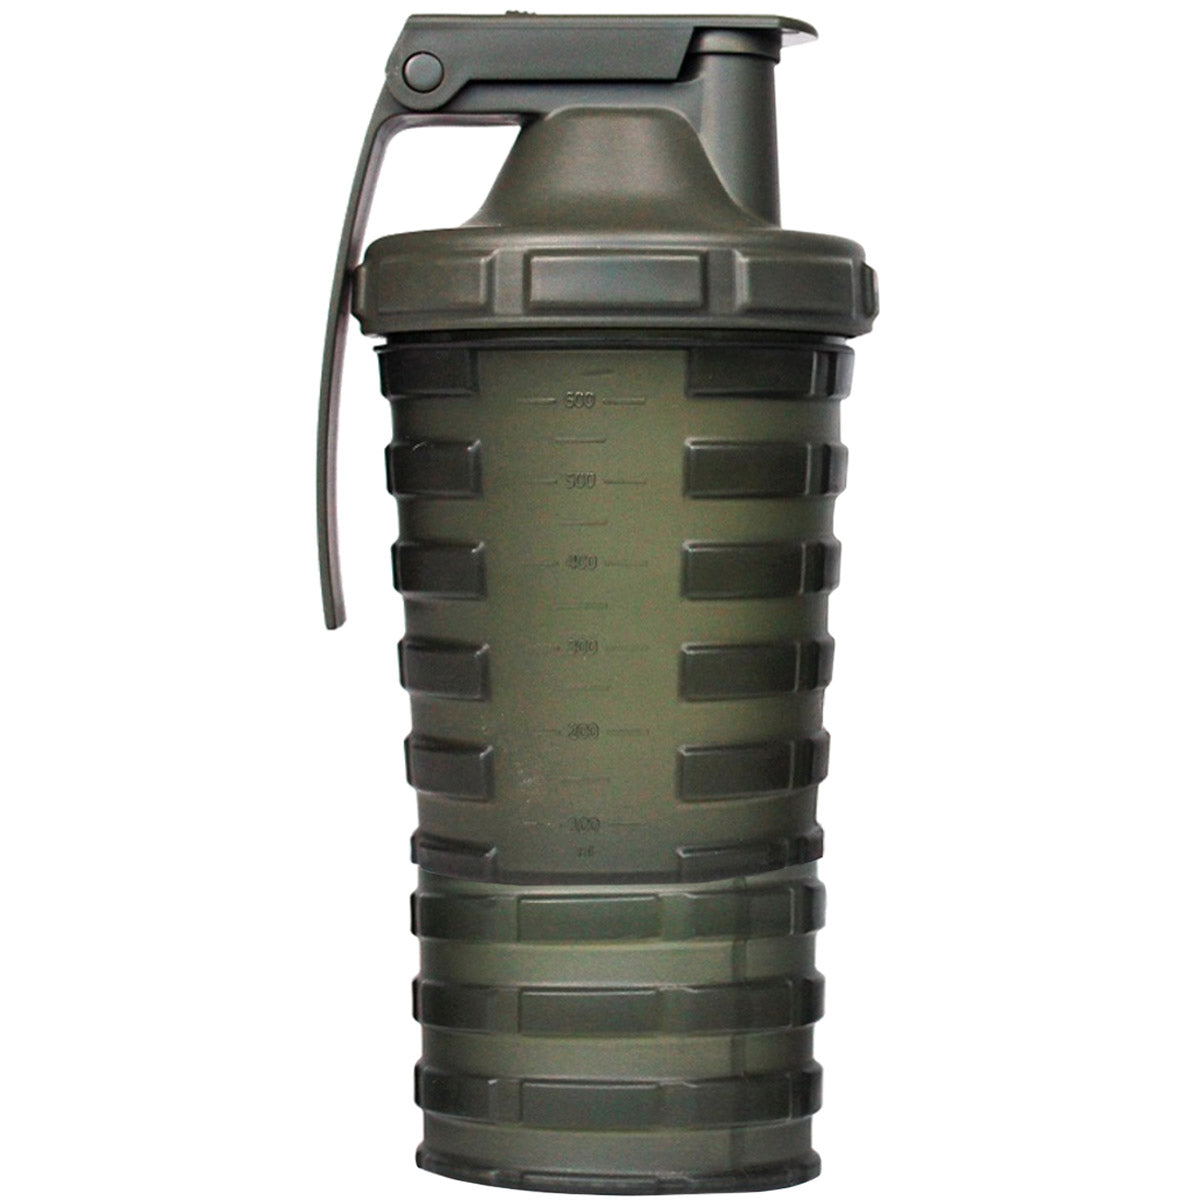 Grenade 20 oz. Shaker Blender Mixer Bottle with 600ml Protein Cup Compartment Grenade